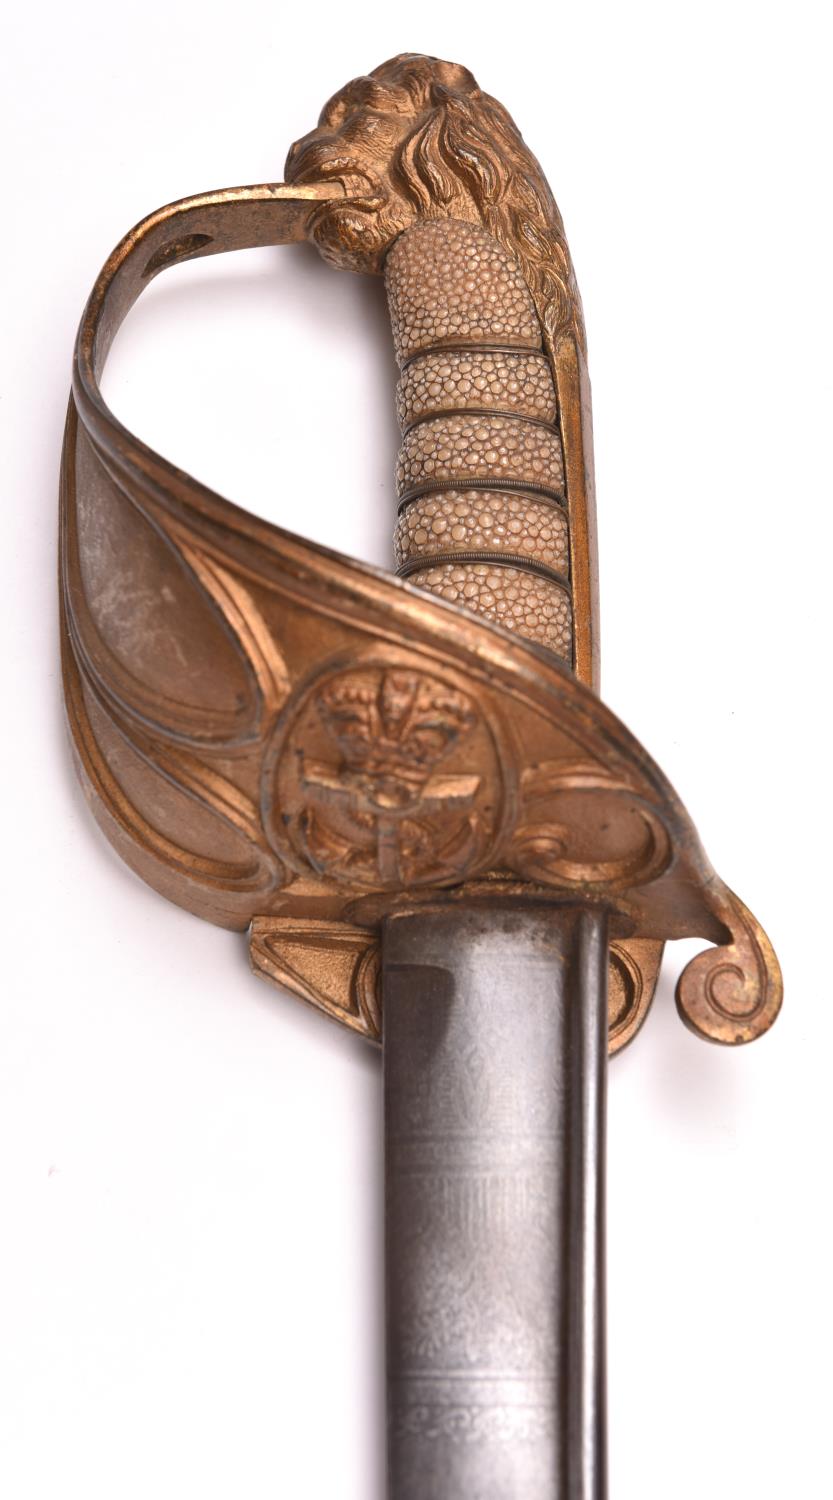 An 1827 pattern Naval officer’s sword, broad pipe back blade 31” x 1¼” at the forte, etched with